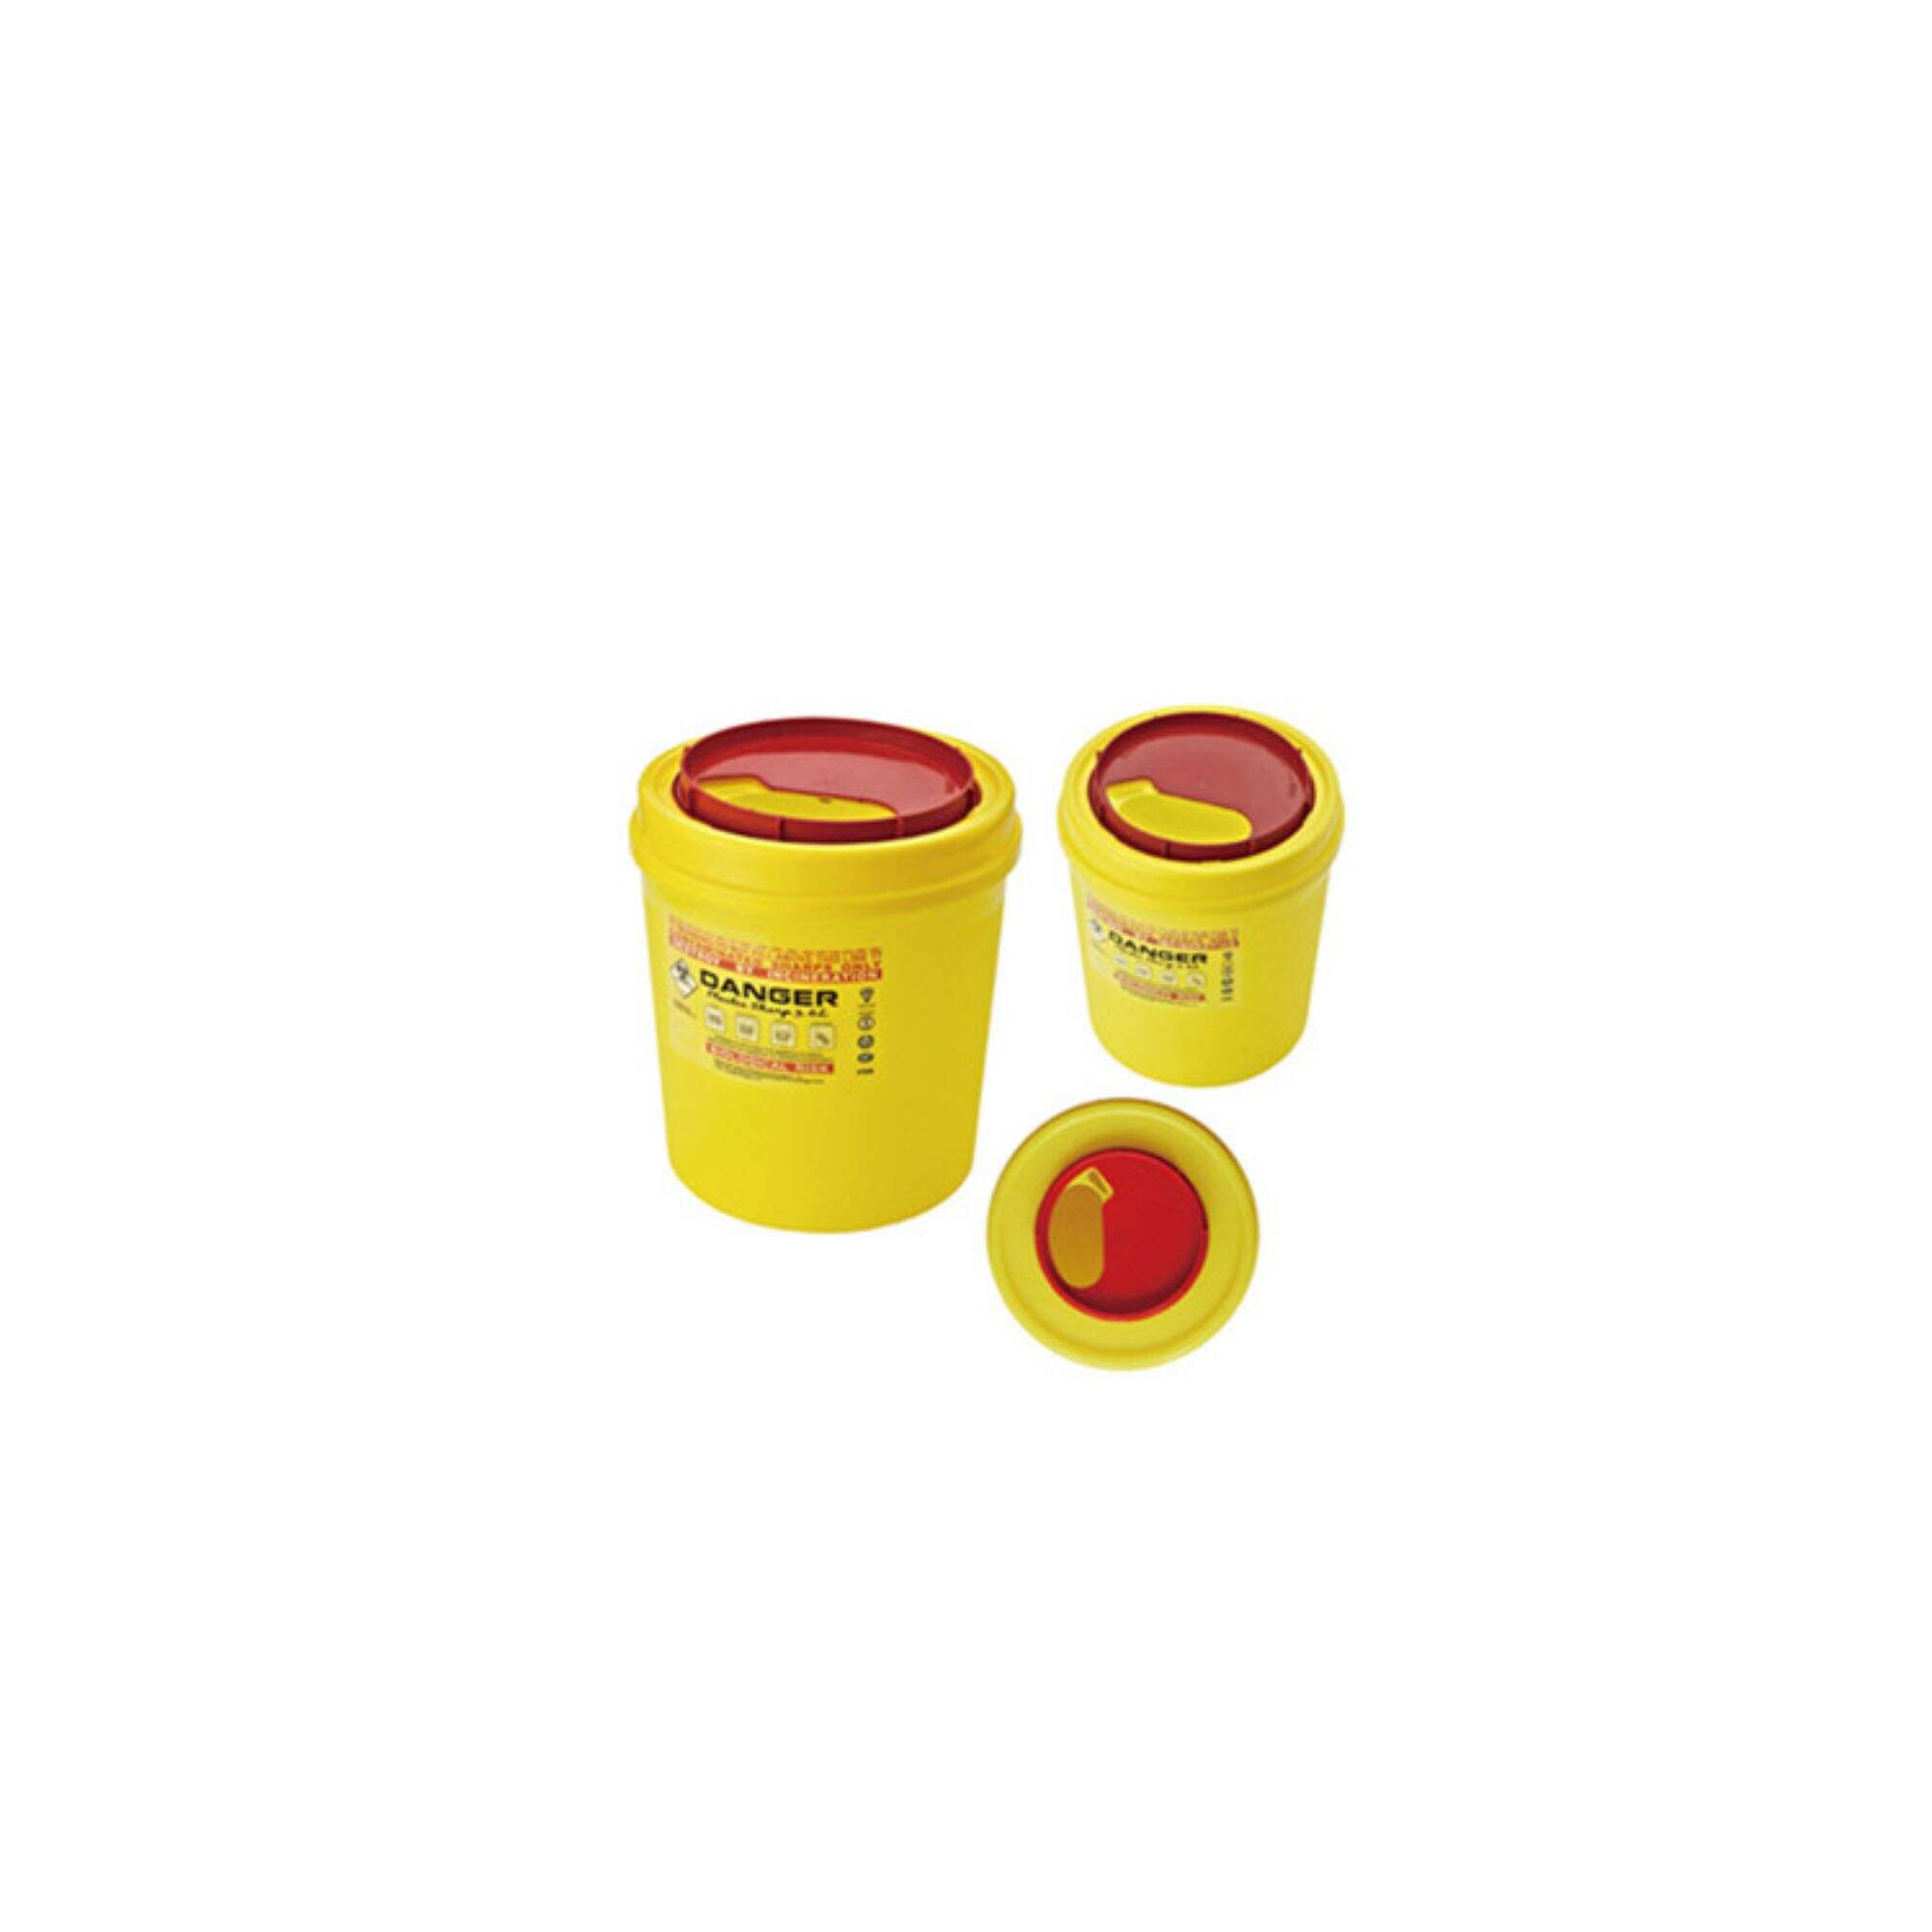 XHE-08 Round Medical Sharps Container 